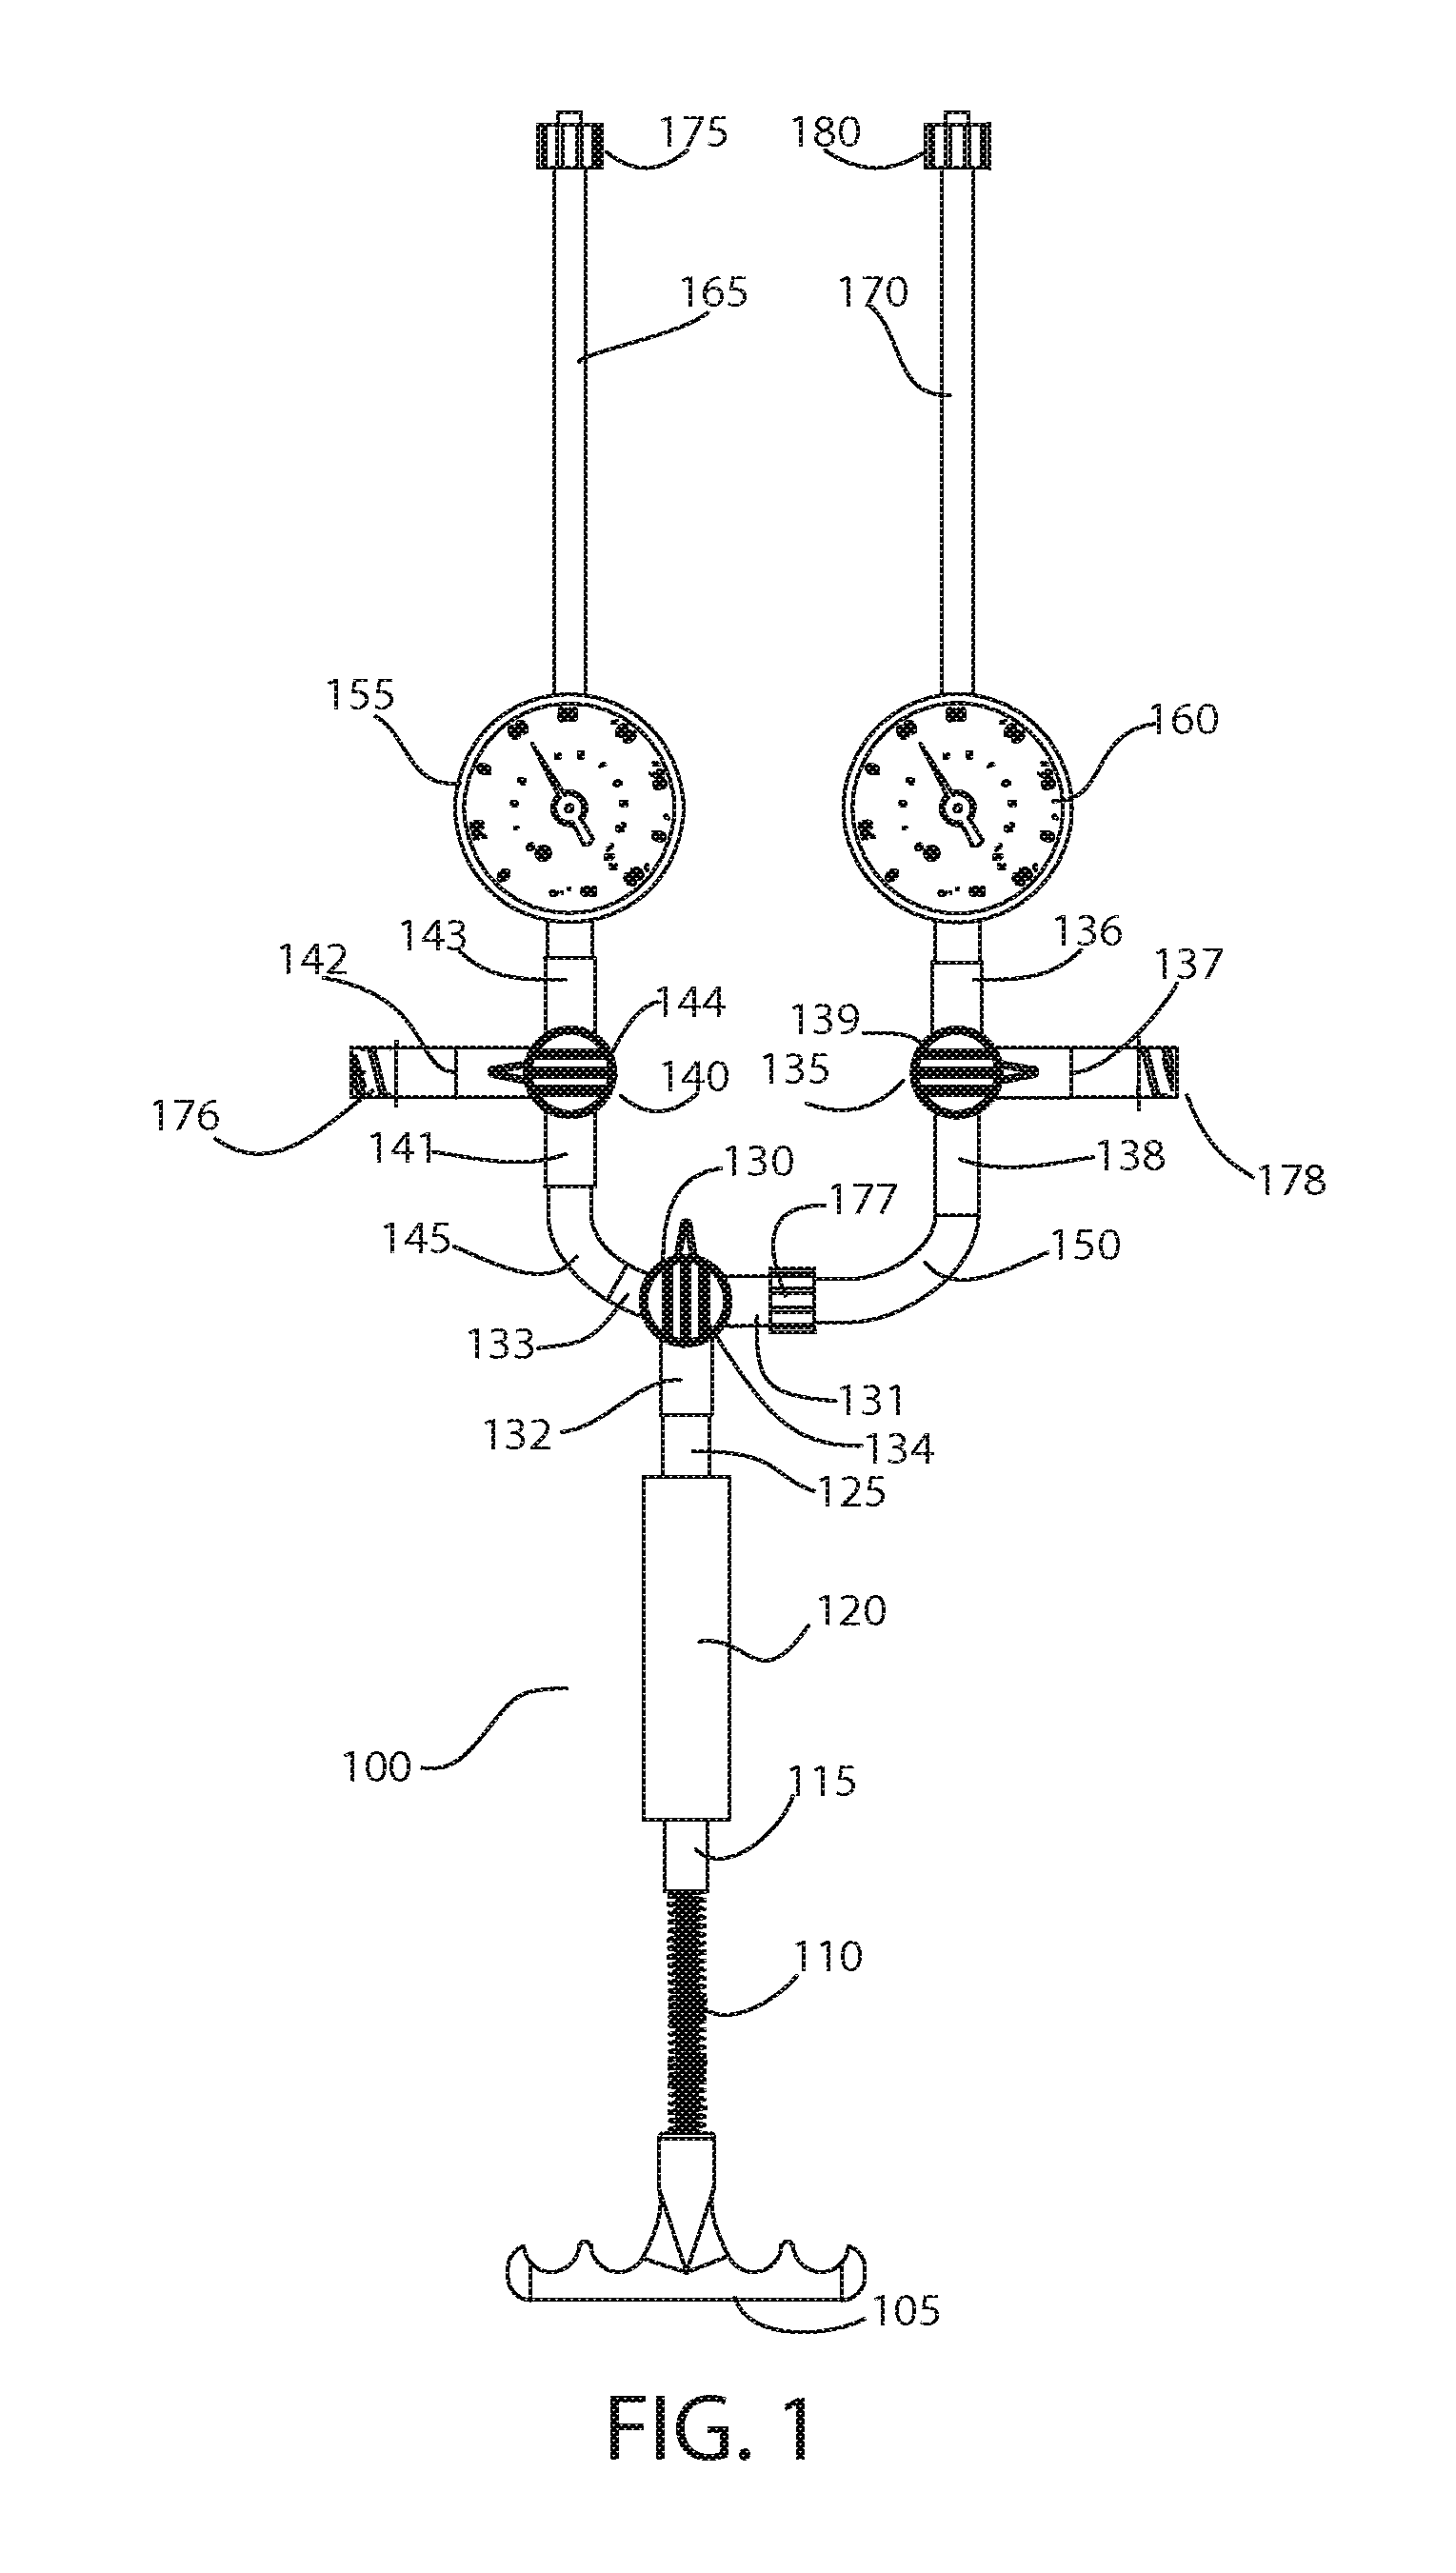 Expandable device for independently inflating, deflating, supplying contrast media to and monitoring up to two balloon catheters for angioplasty